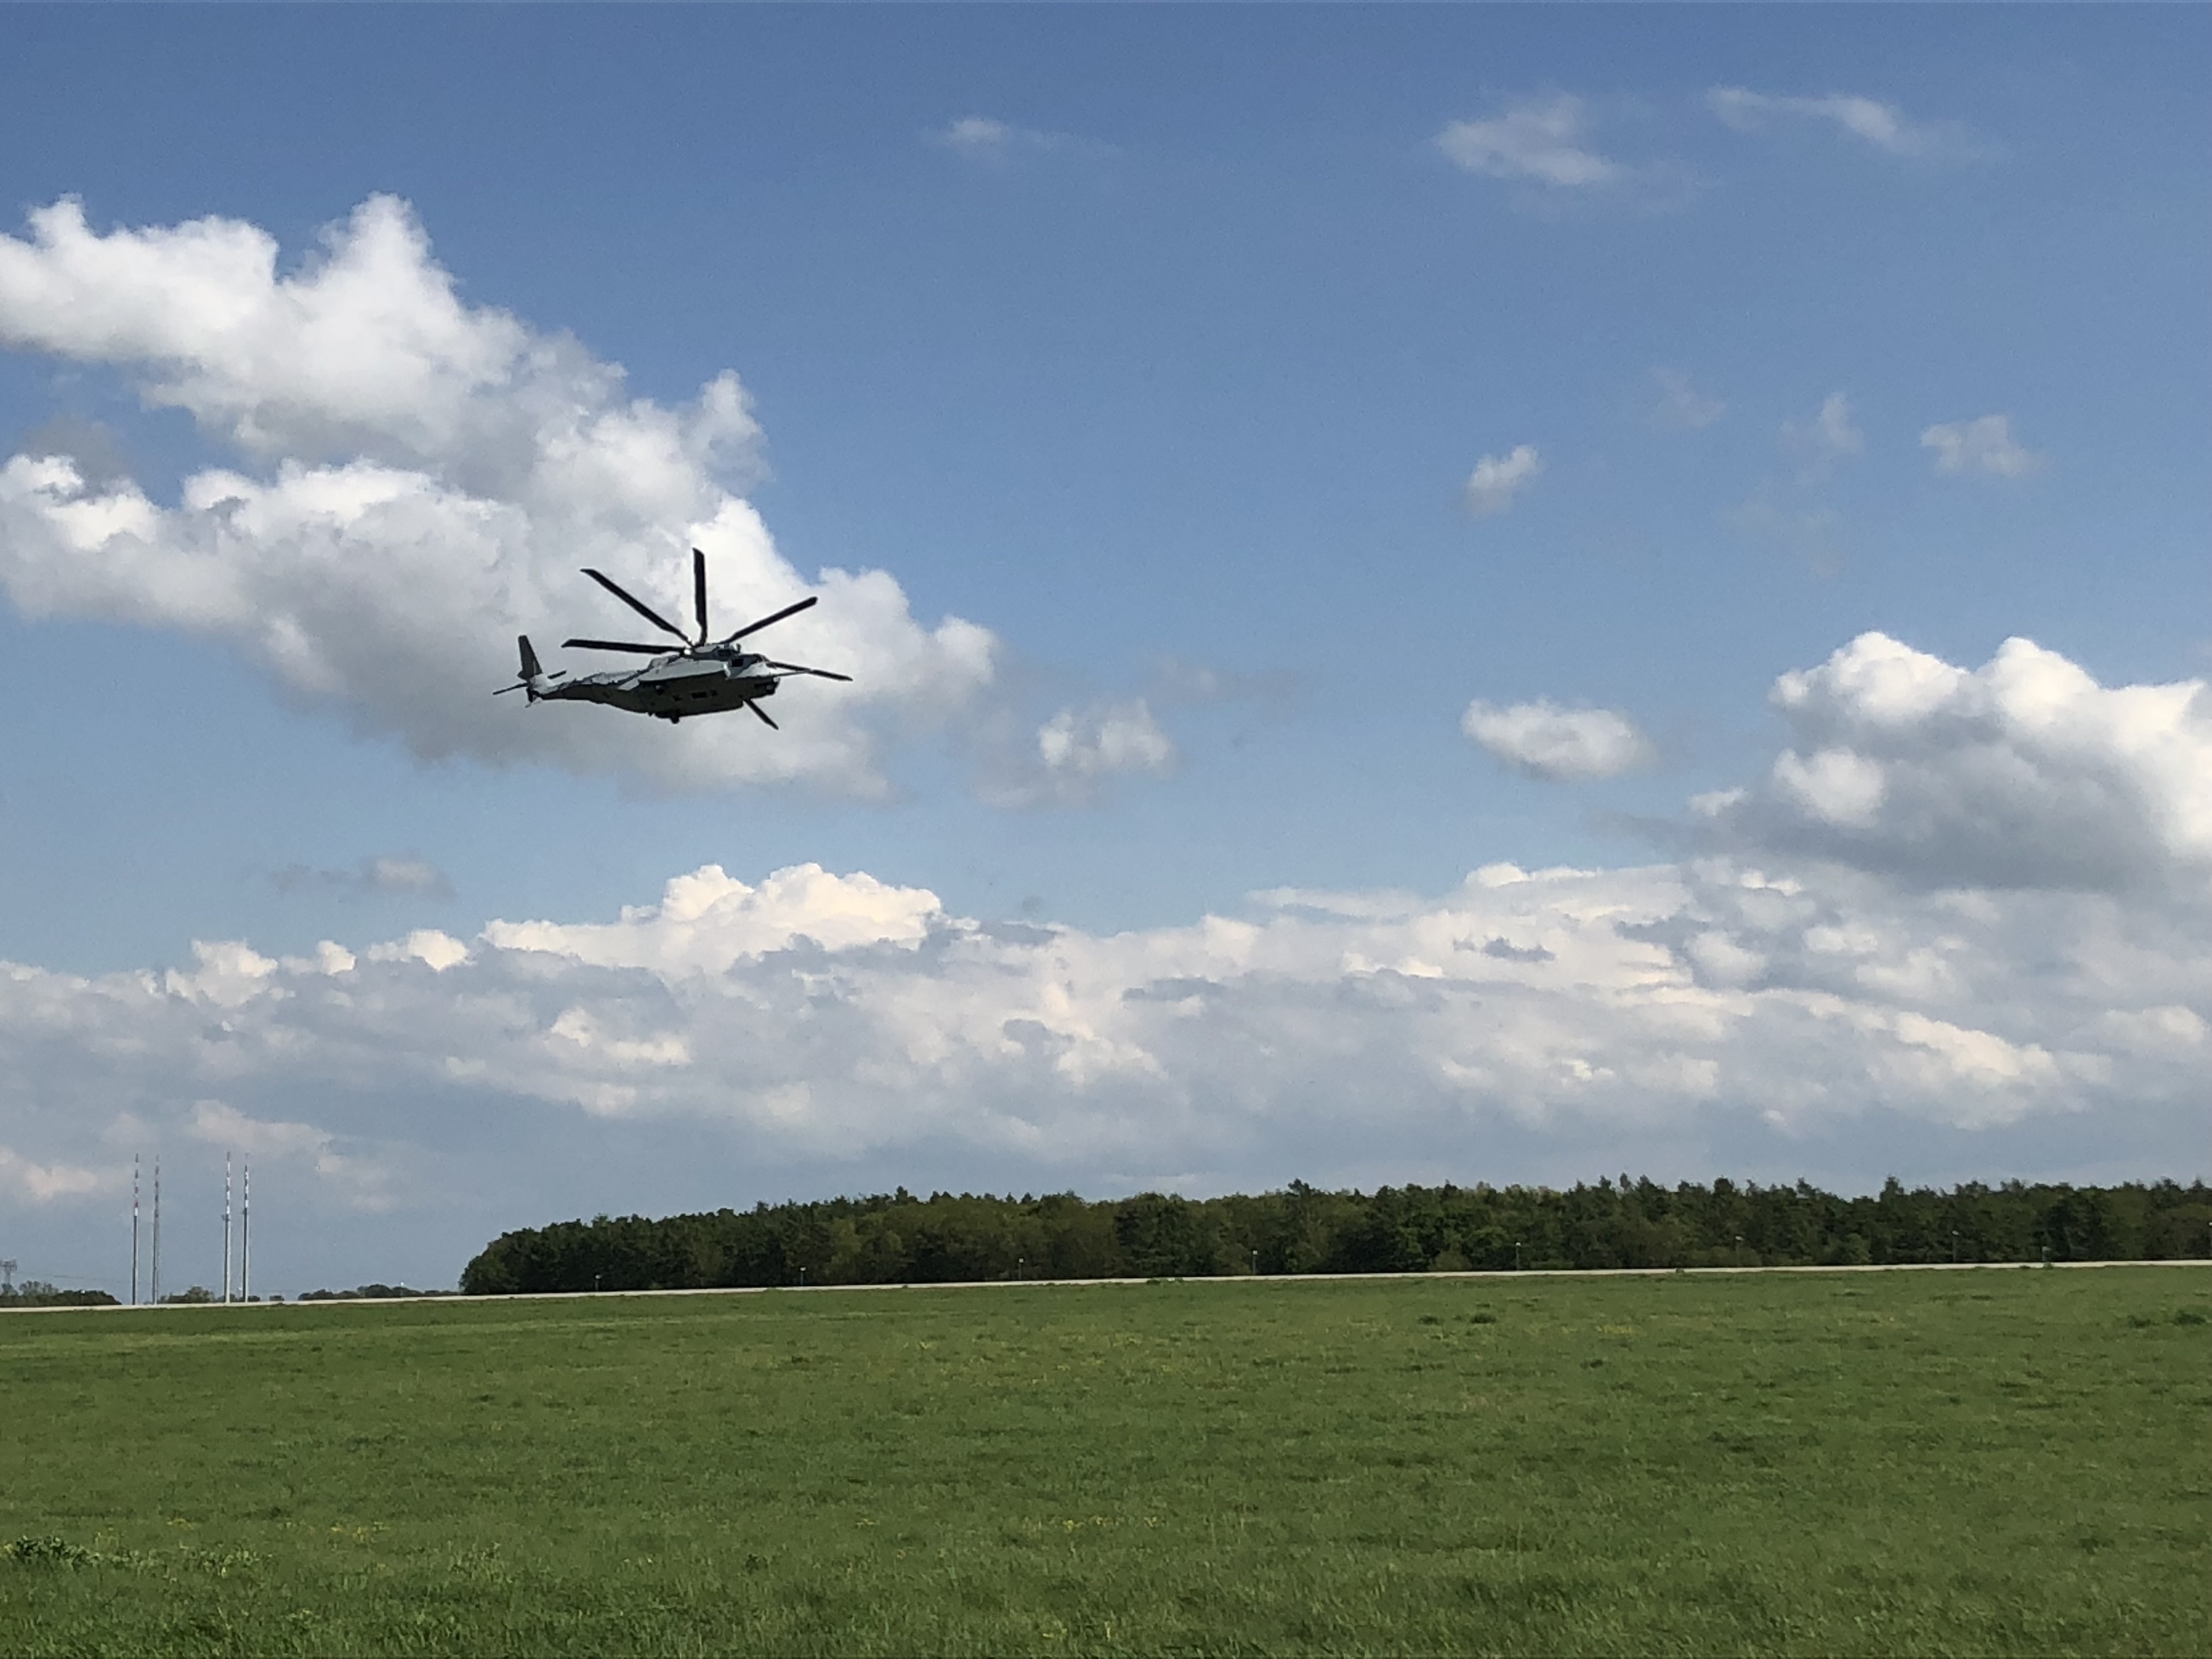 The CH-53K on it's maiden flight in the skies of Berlin (ANNA AHRONHEIM)